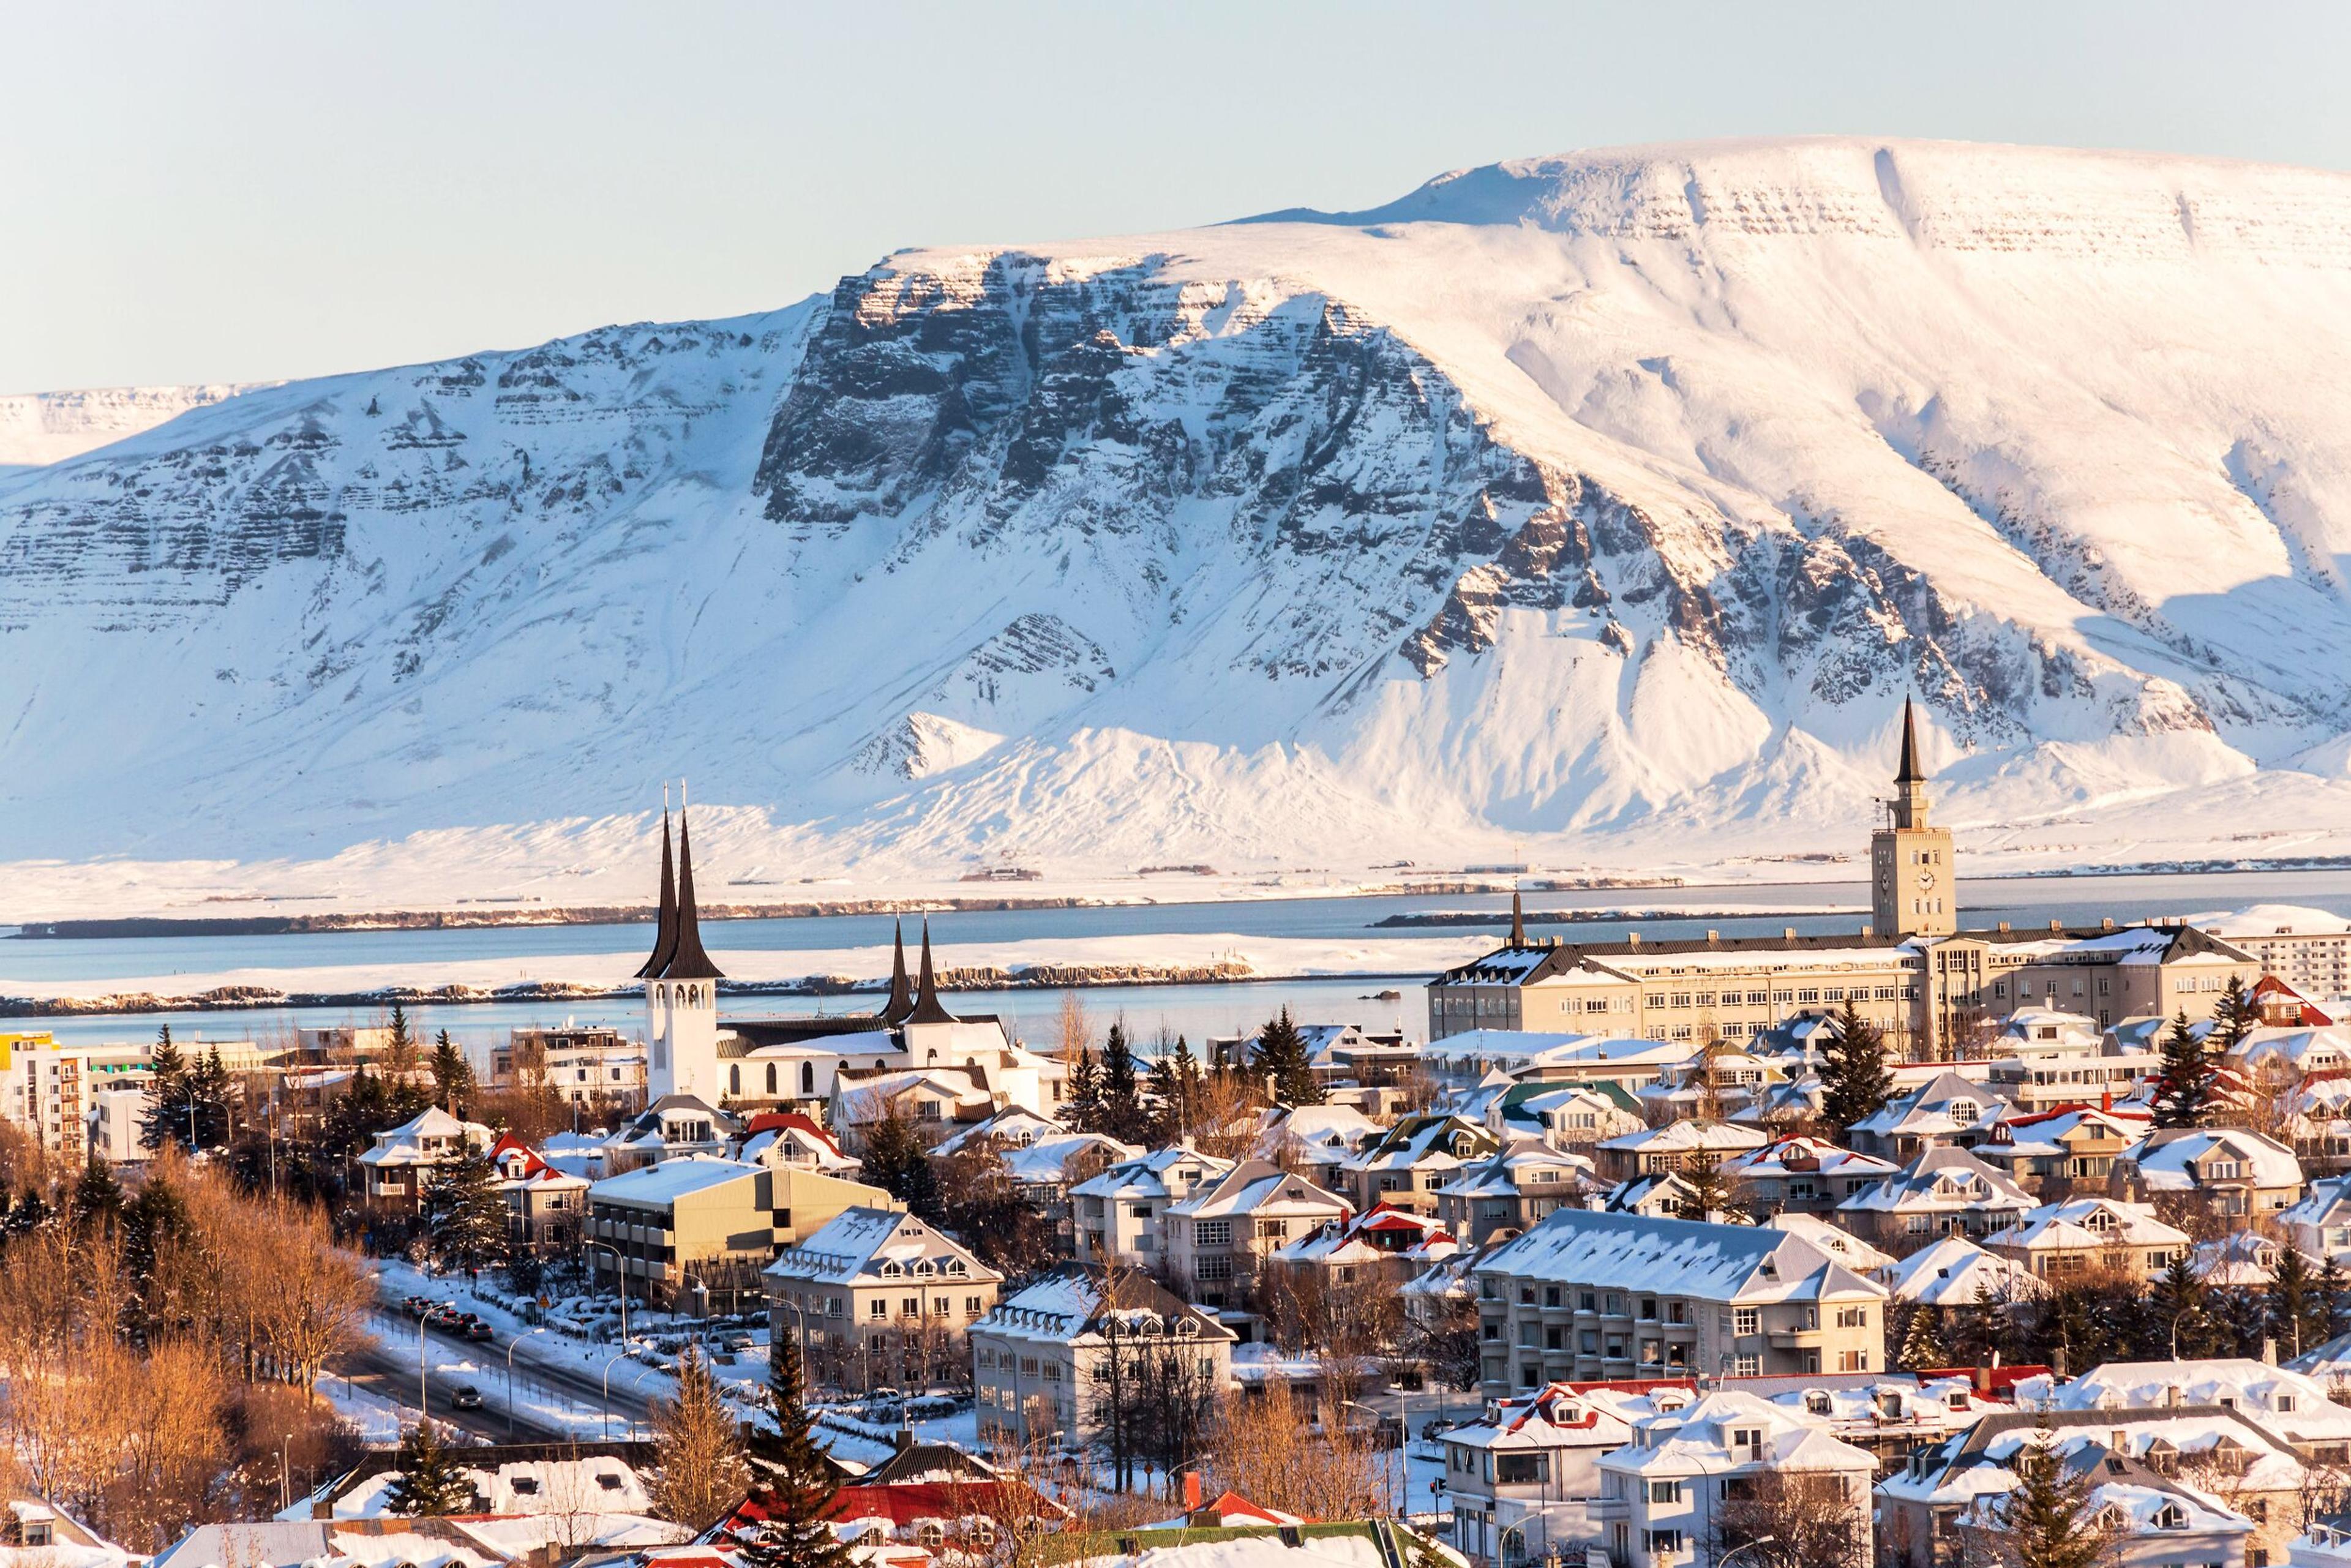 The snowy Reykjavík with distinctive architecture, including a tall church spire, against a backdrop of a mountain bathed in the warm glow of the sun.